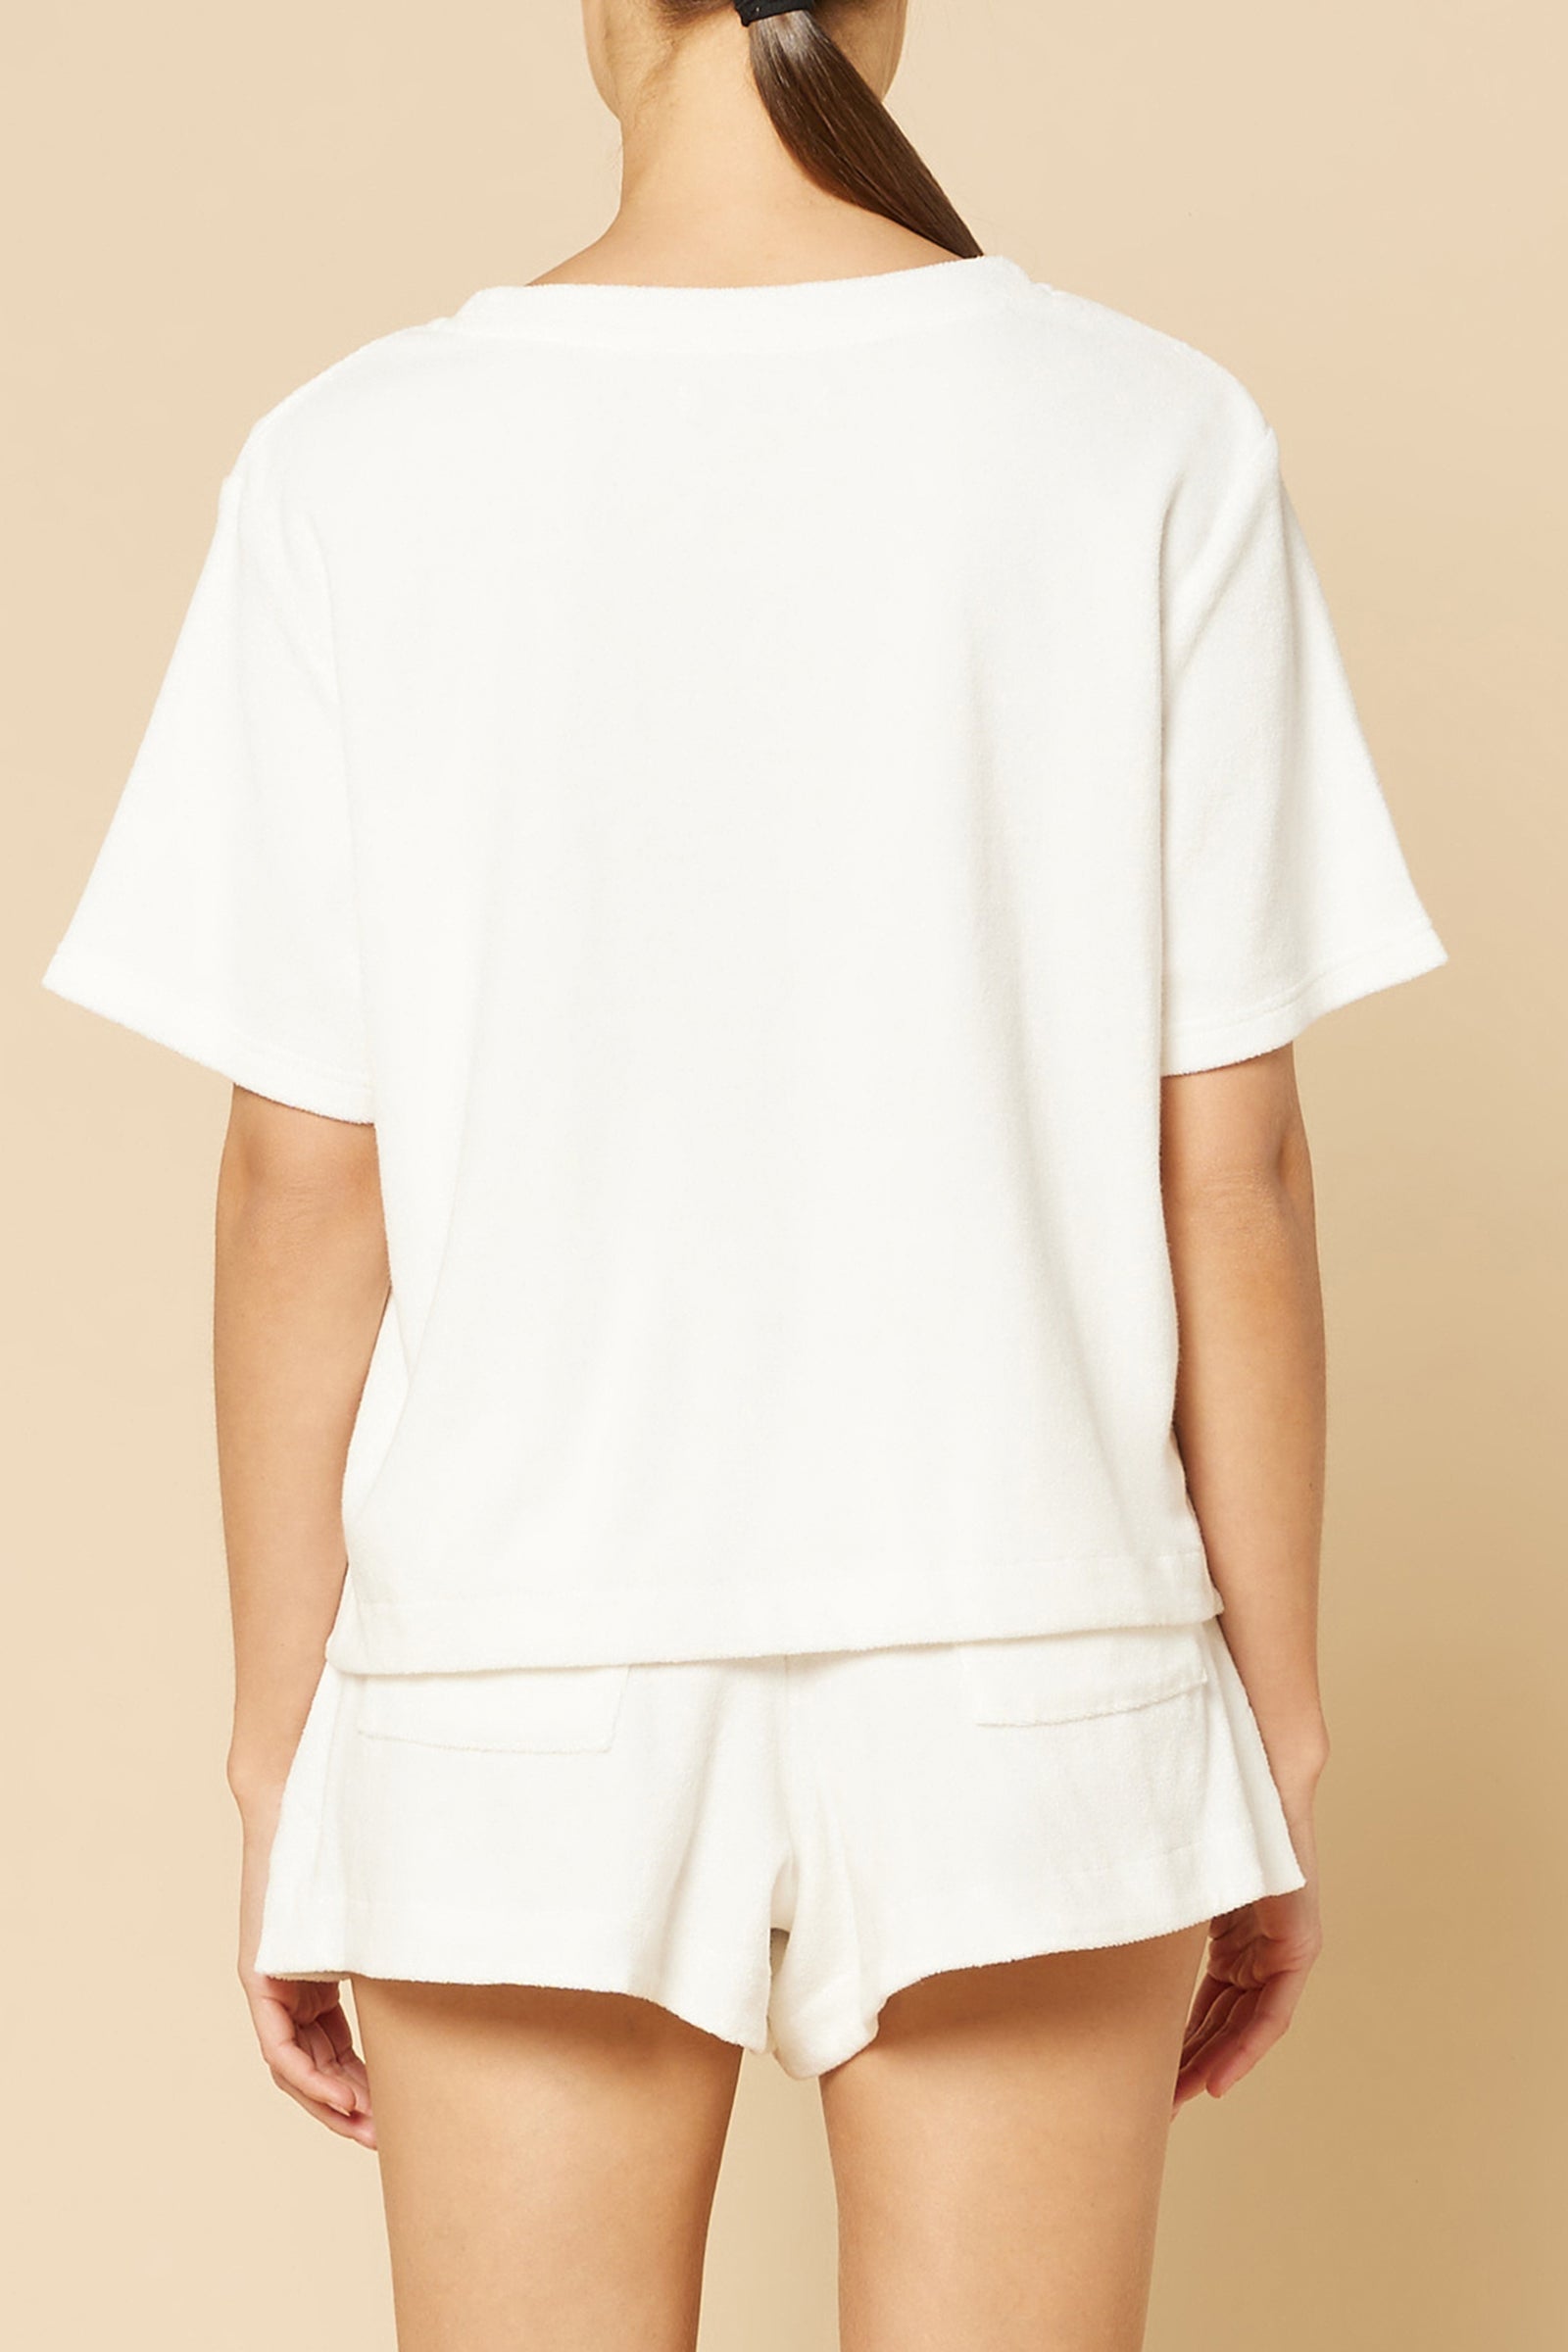 Nude Lucy Finn Terry Tee in White